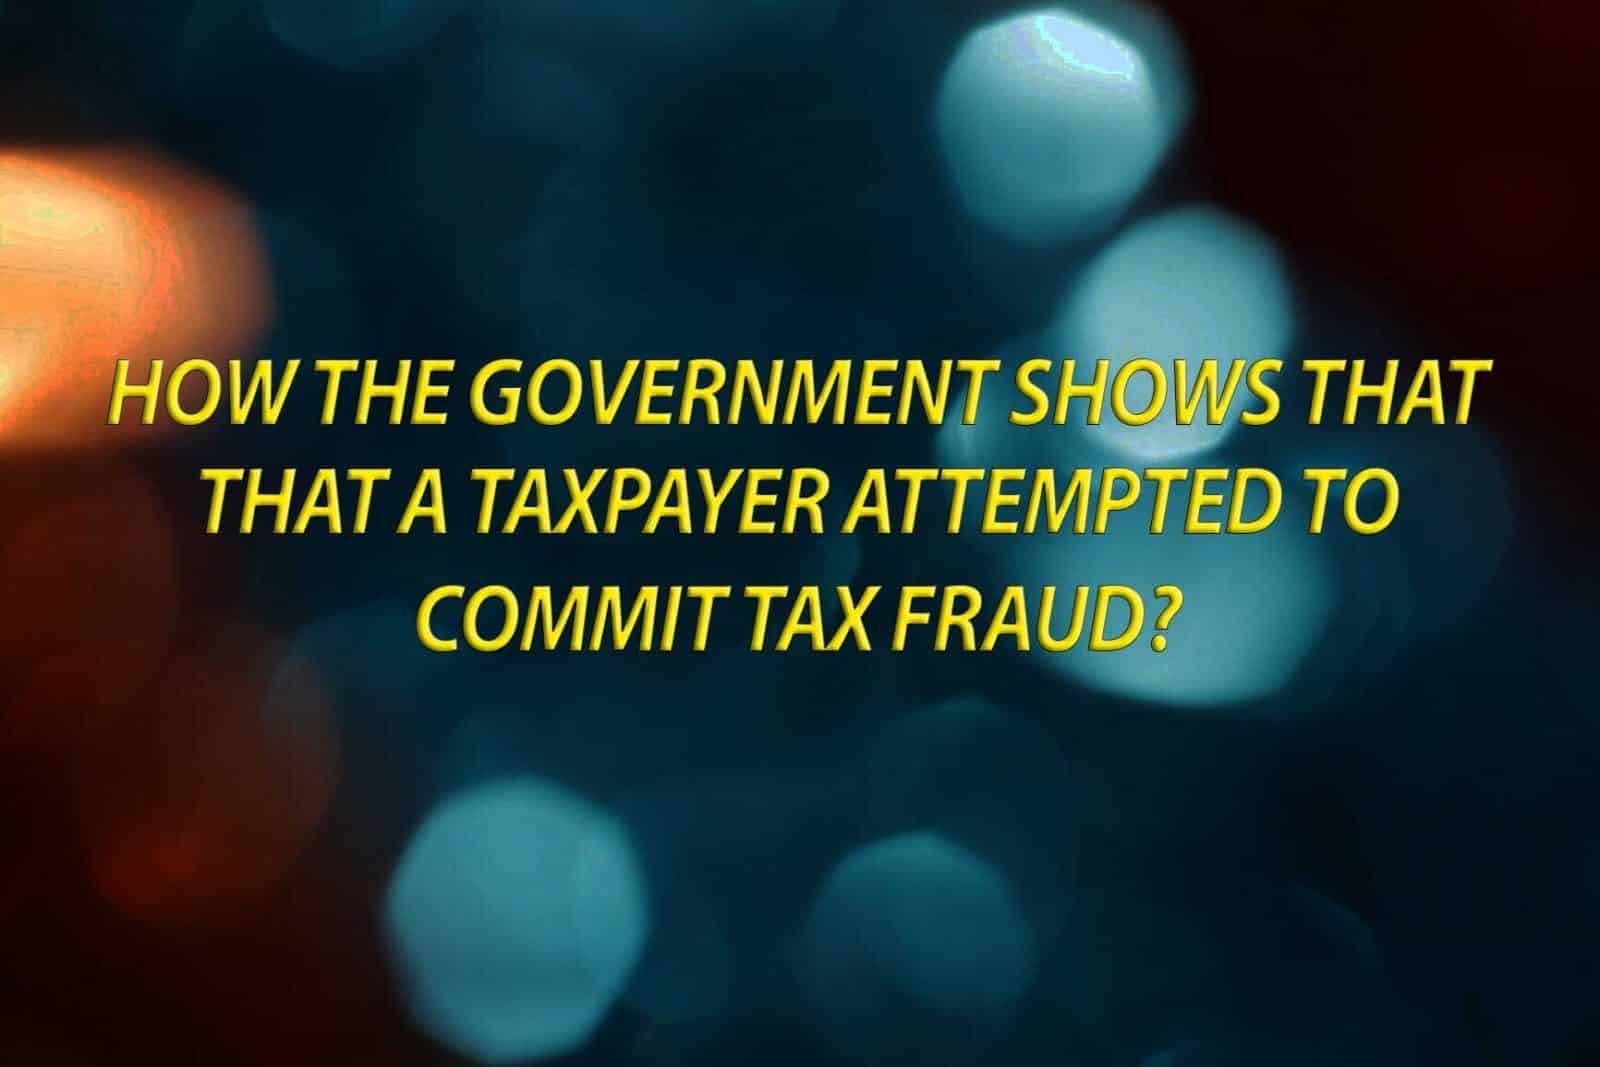 How a government shows a tax payer attempted to commit tax fraud